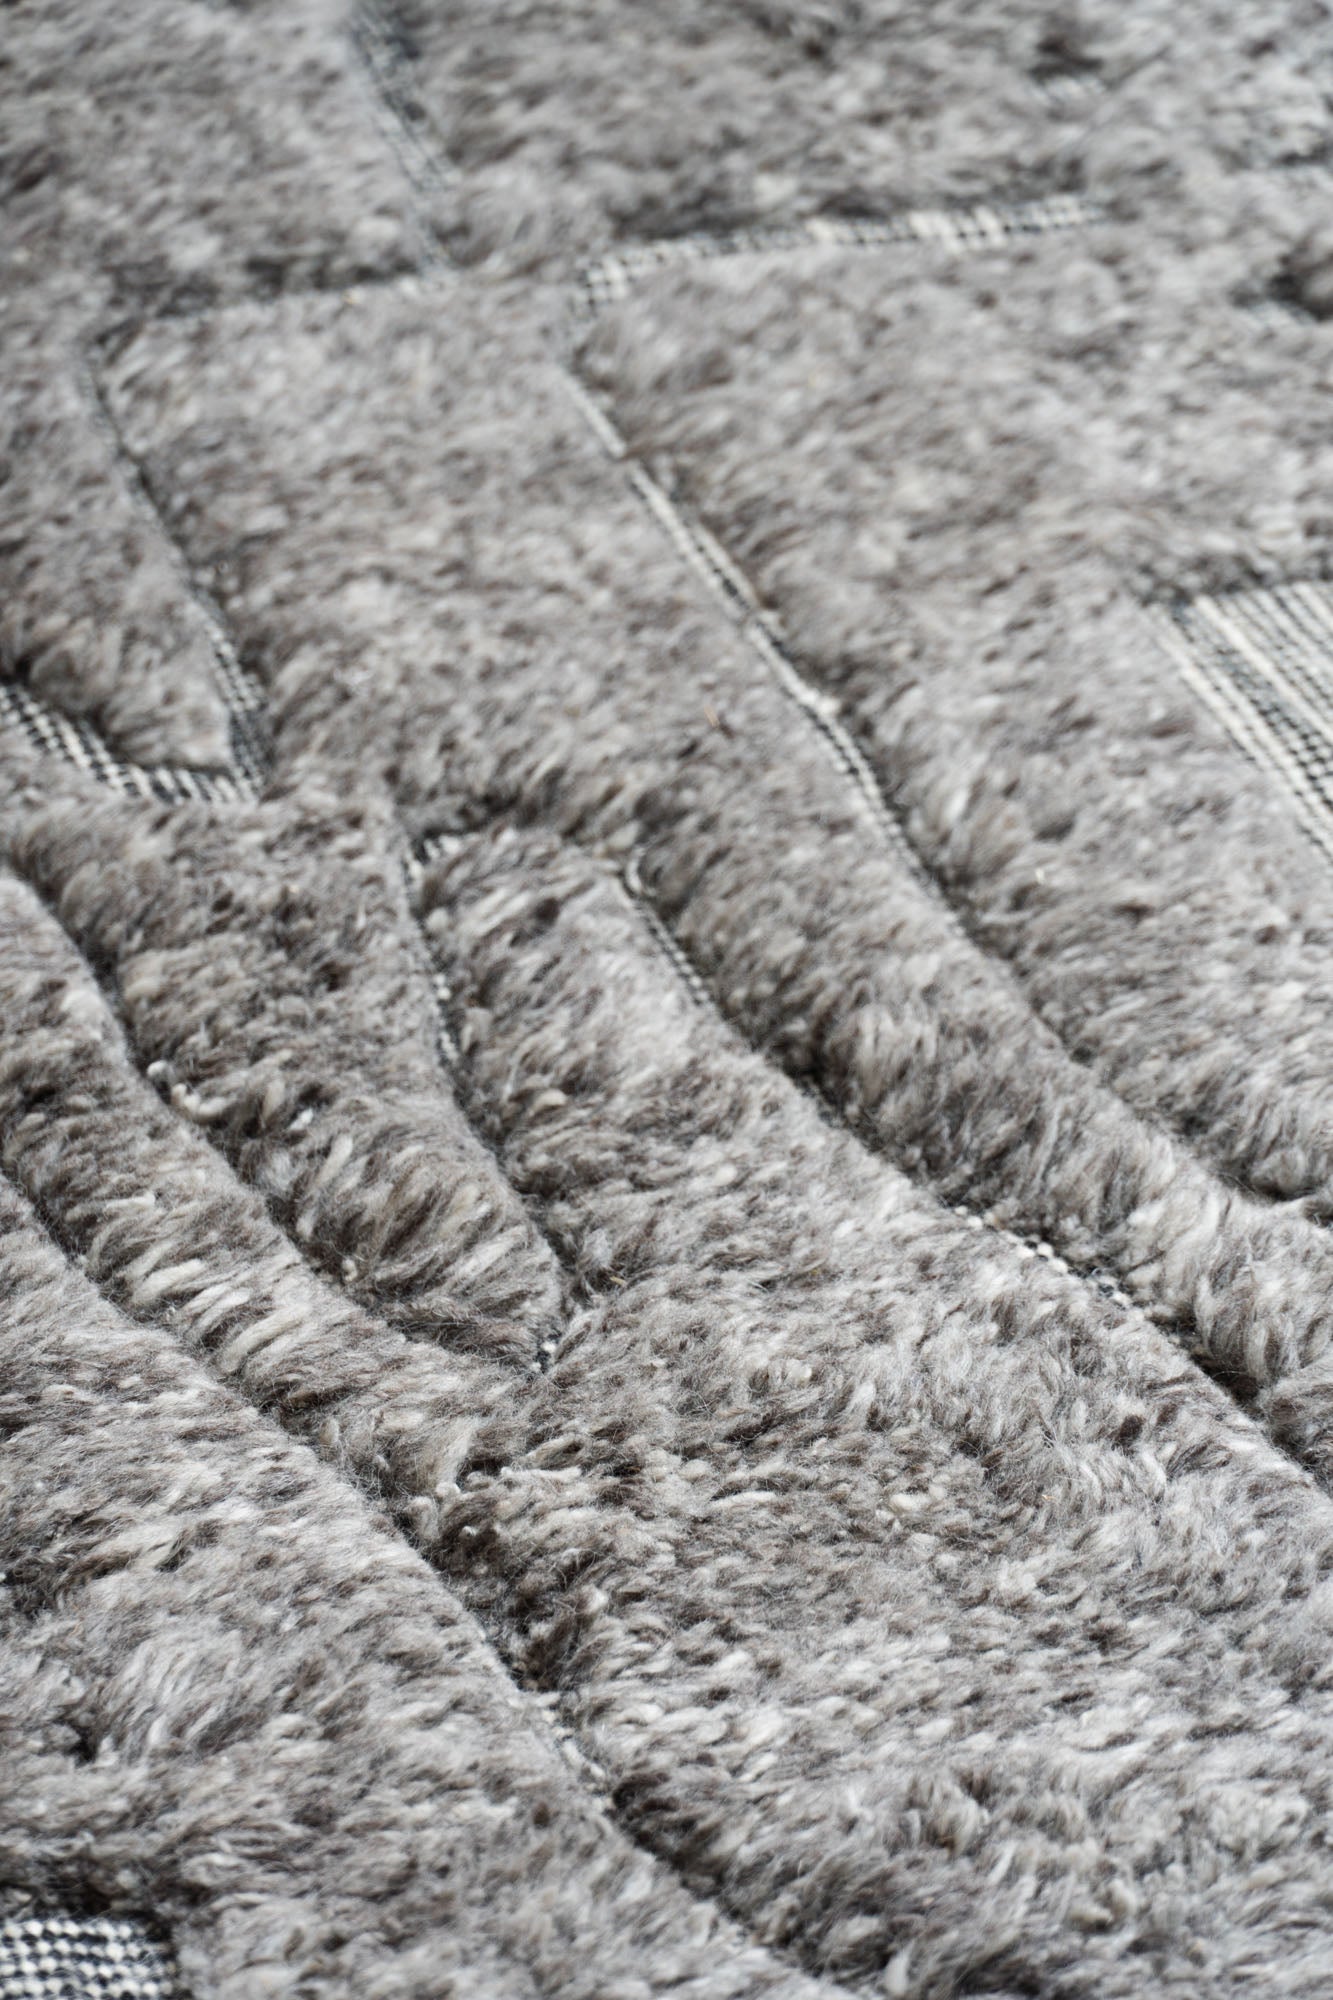 Close-up of the PCB Rug by Zakaria Rugs.